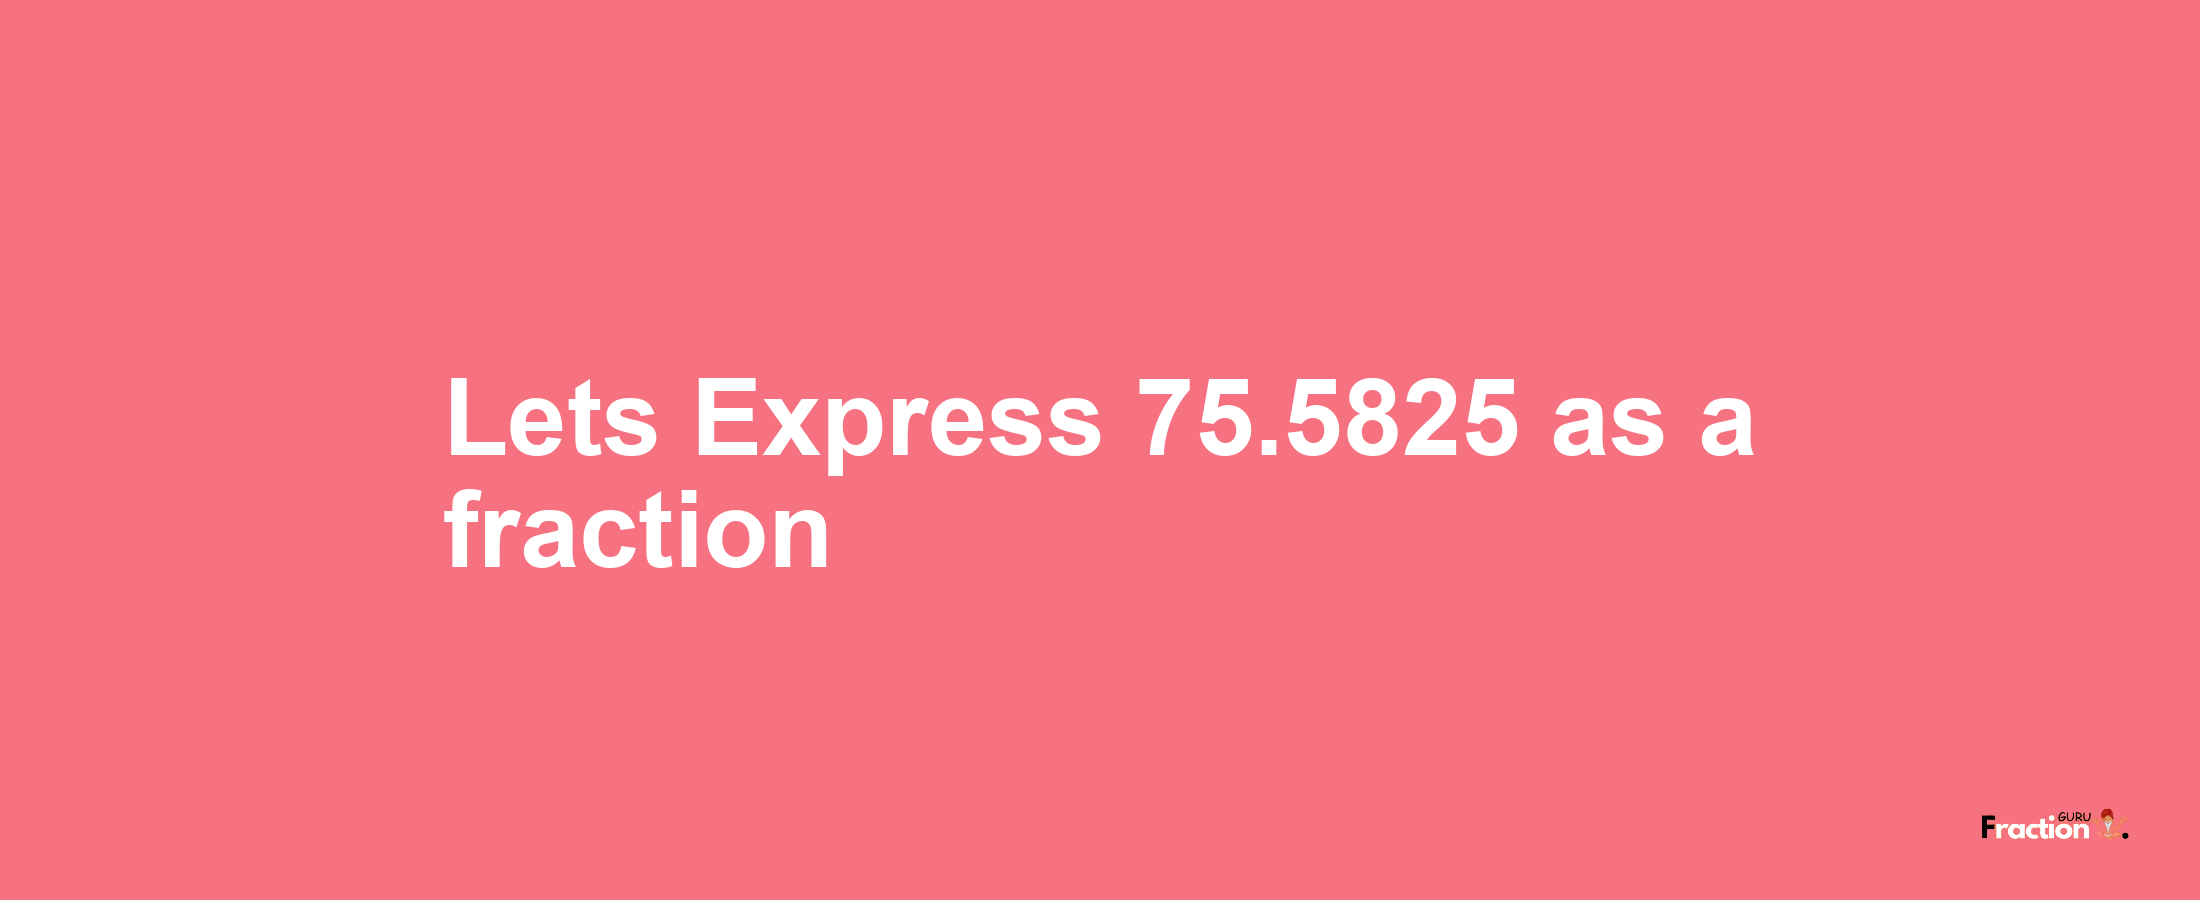 Lets Express 75.5825 as afraction